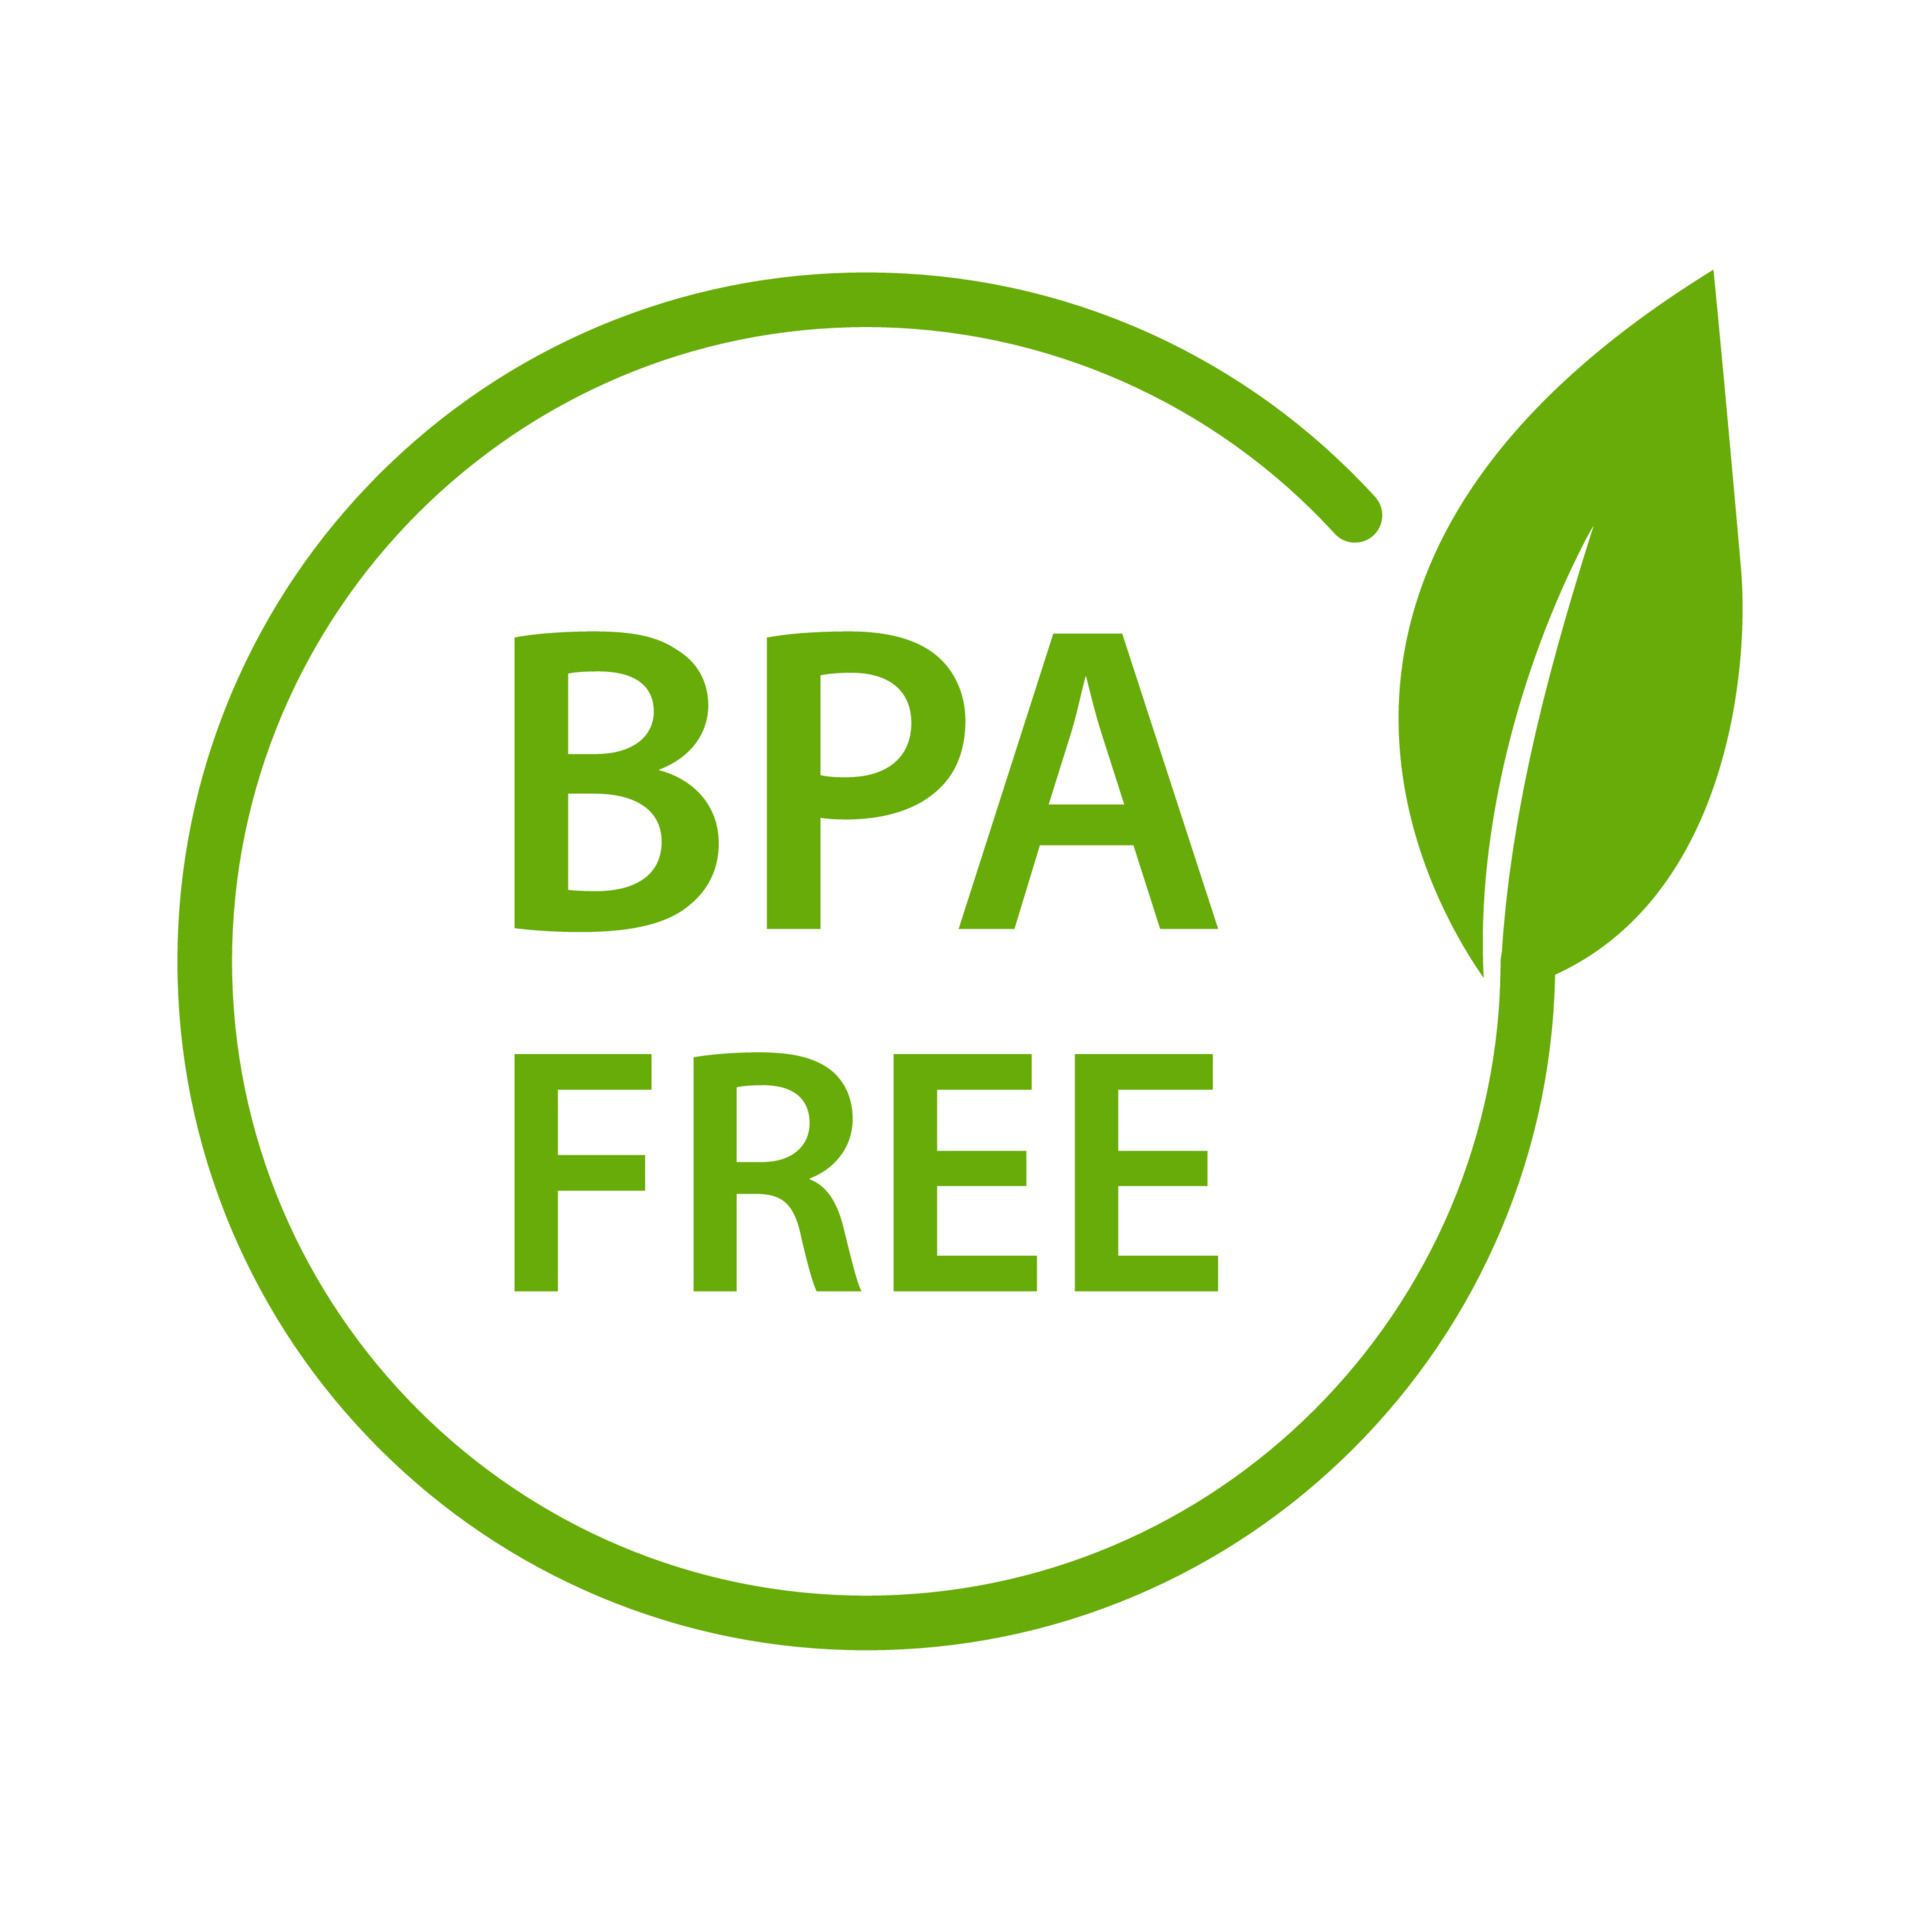 https://static.vecteezy.com/system/resources/previews/009/971/712/original/bpa-free-bisphenol-a-and-phthalates-free-icon-non-toxic-plastic-sign-for-graphic-design-logo-website-social-media-mobile-app-ui-illustration-vector.jpg